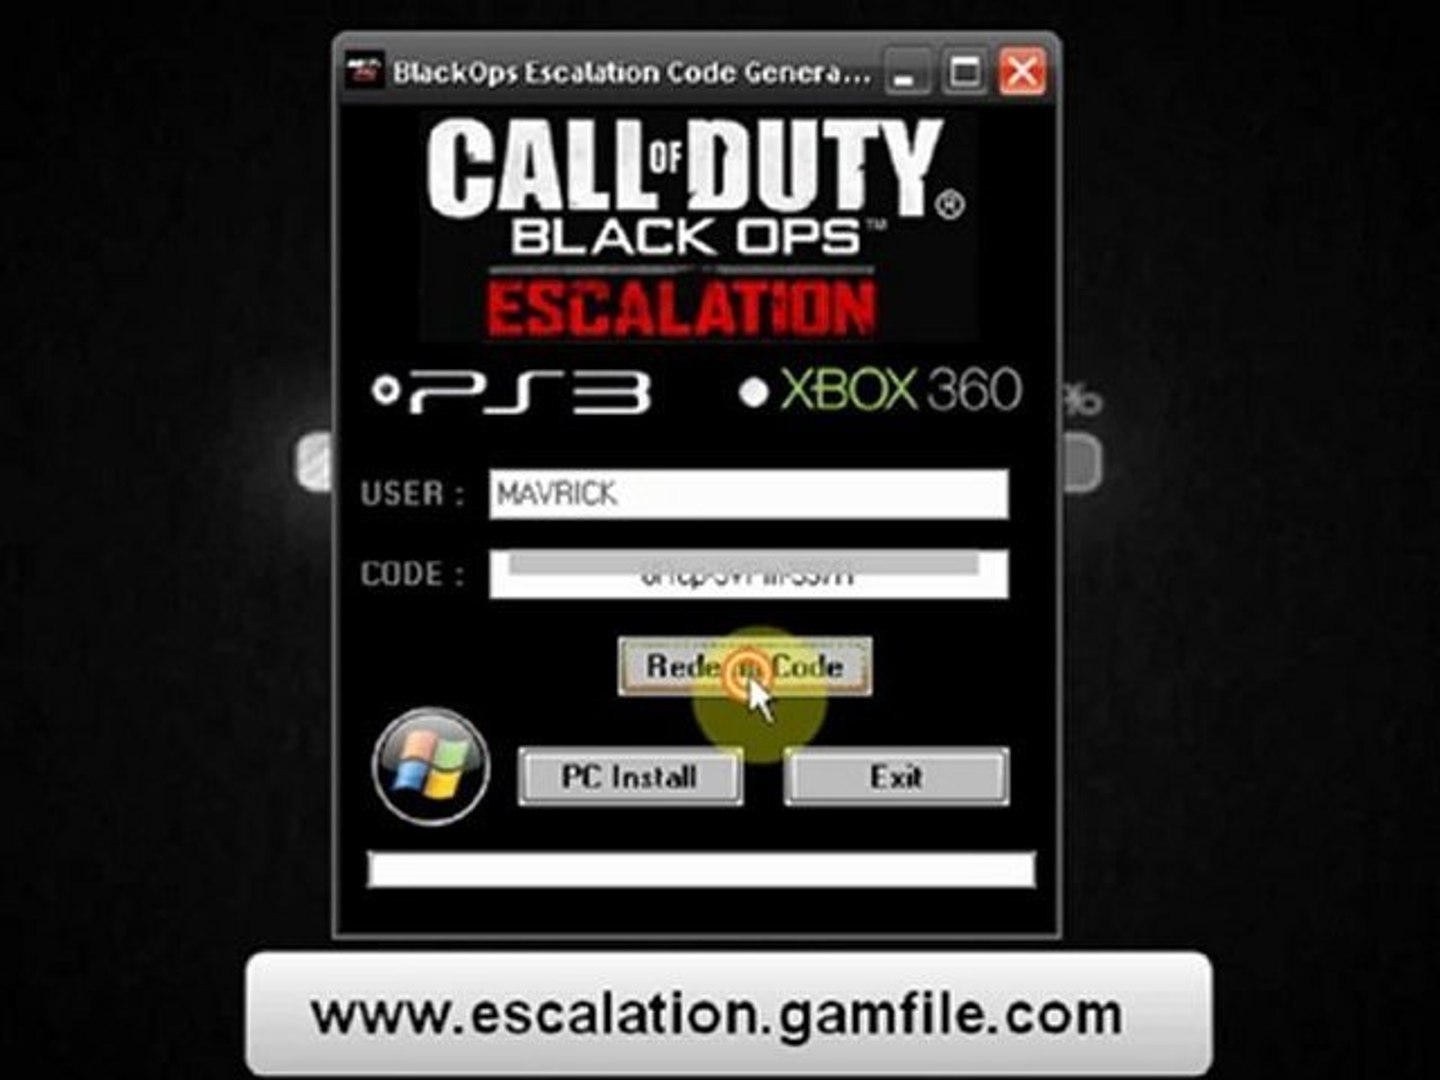 Black Ops Escalation Map pack Promotion Code Free - PS3 - video Dailymotion